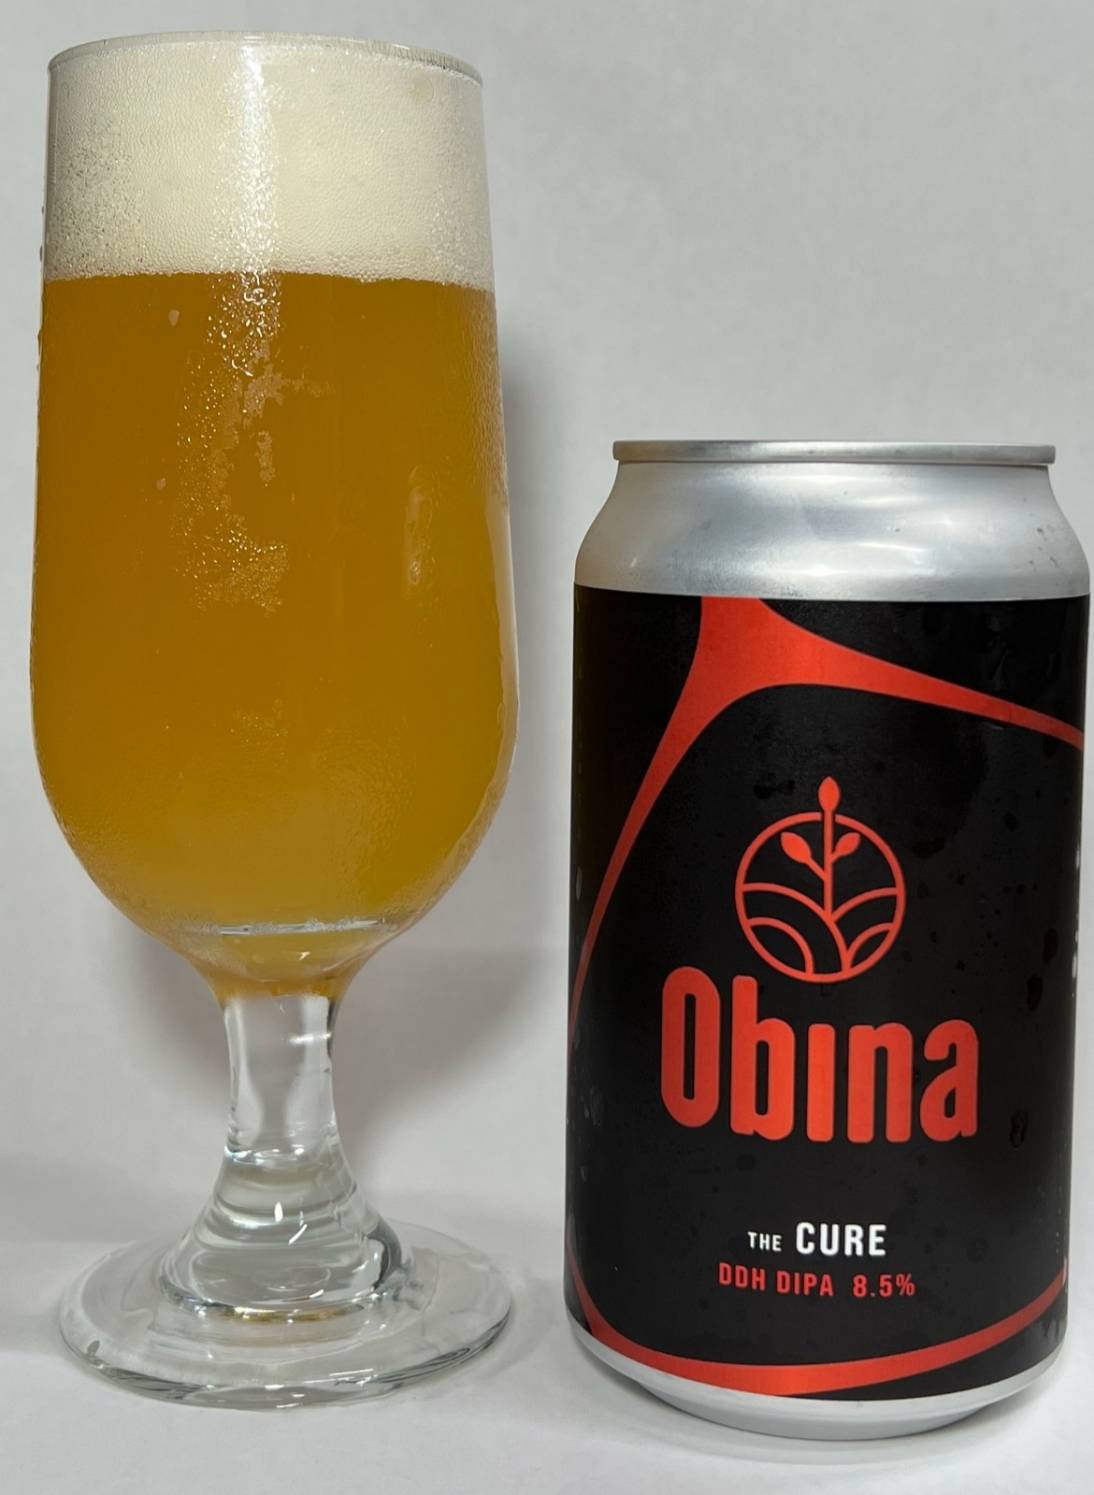 Double IPA "the Cure" - 1 Can